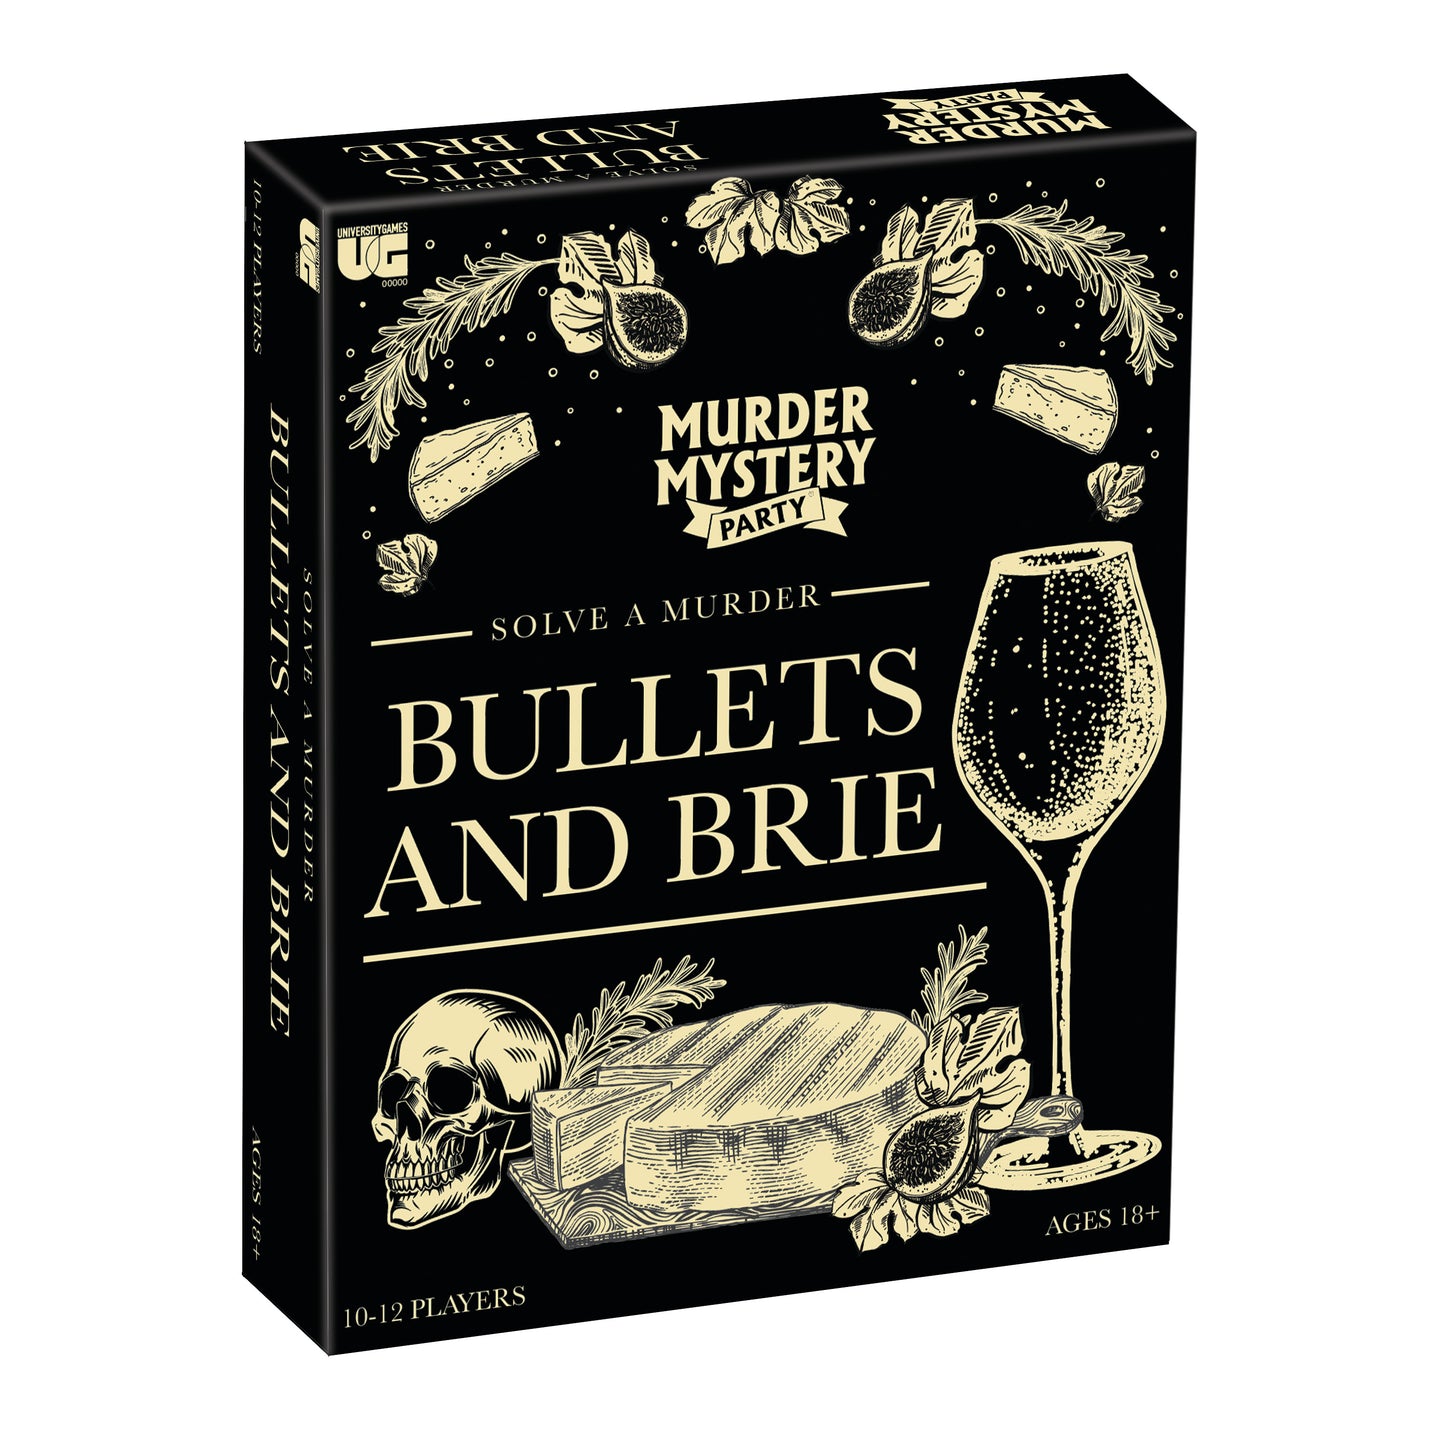 Murder Mystery Party Bullets and Brie